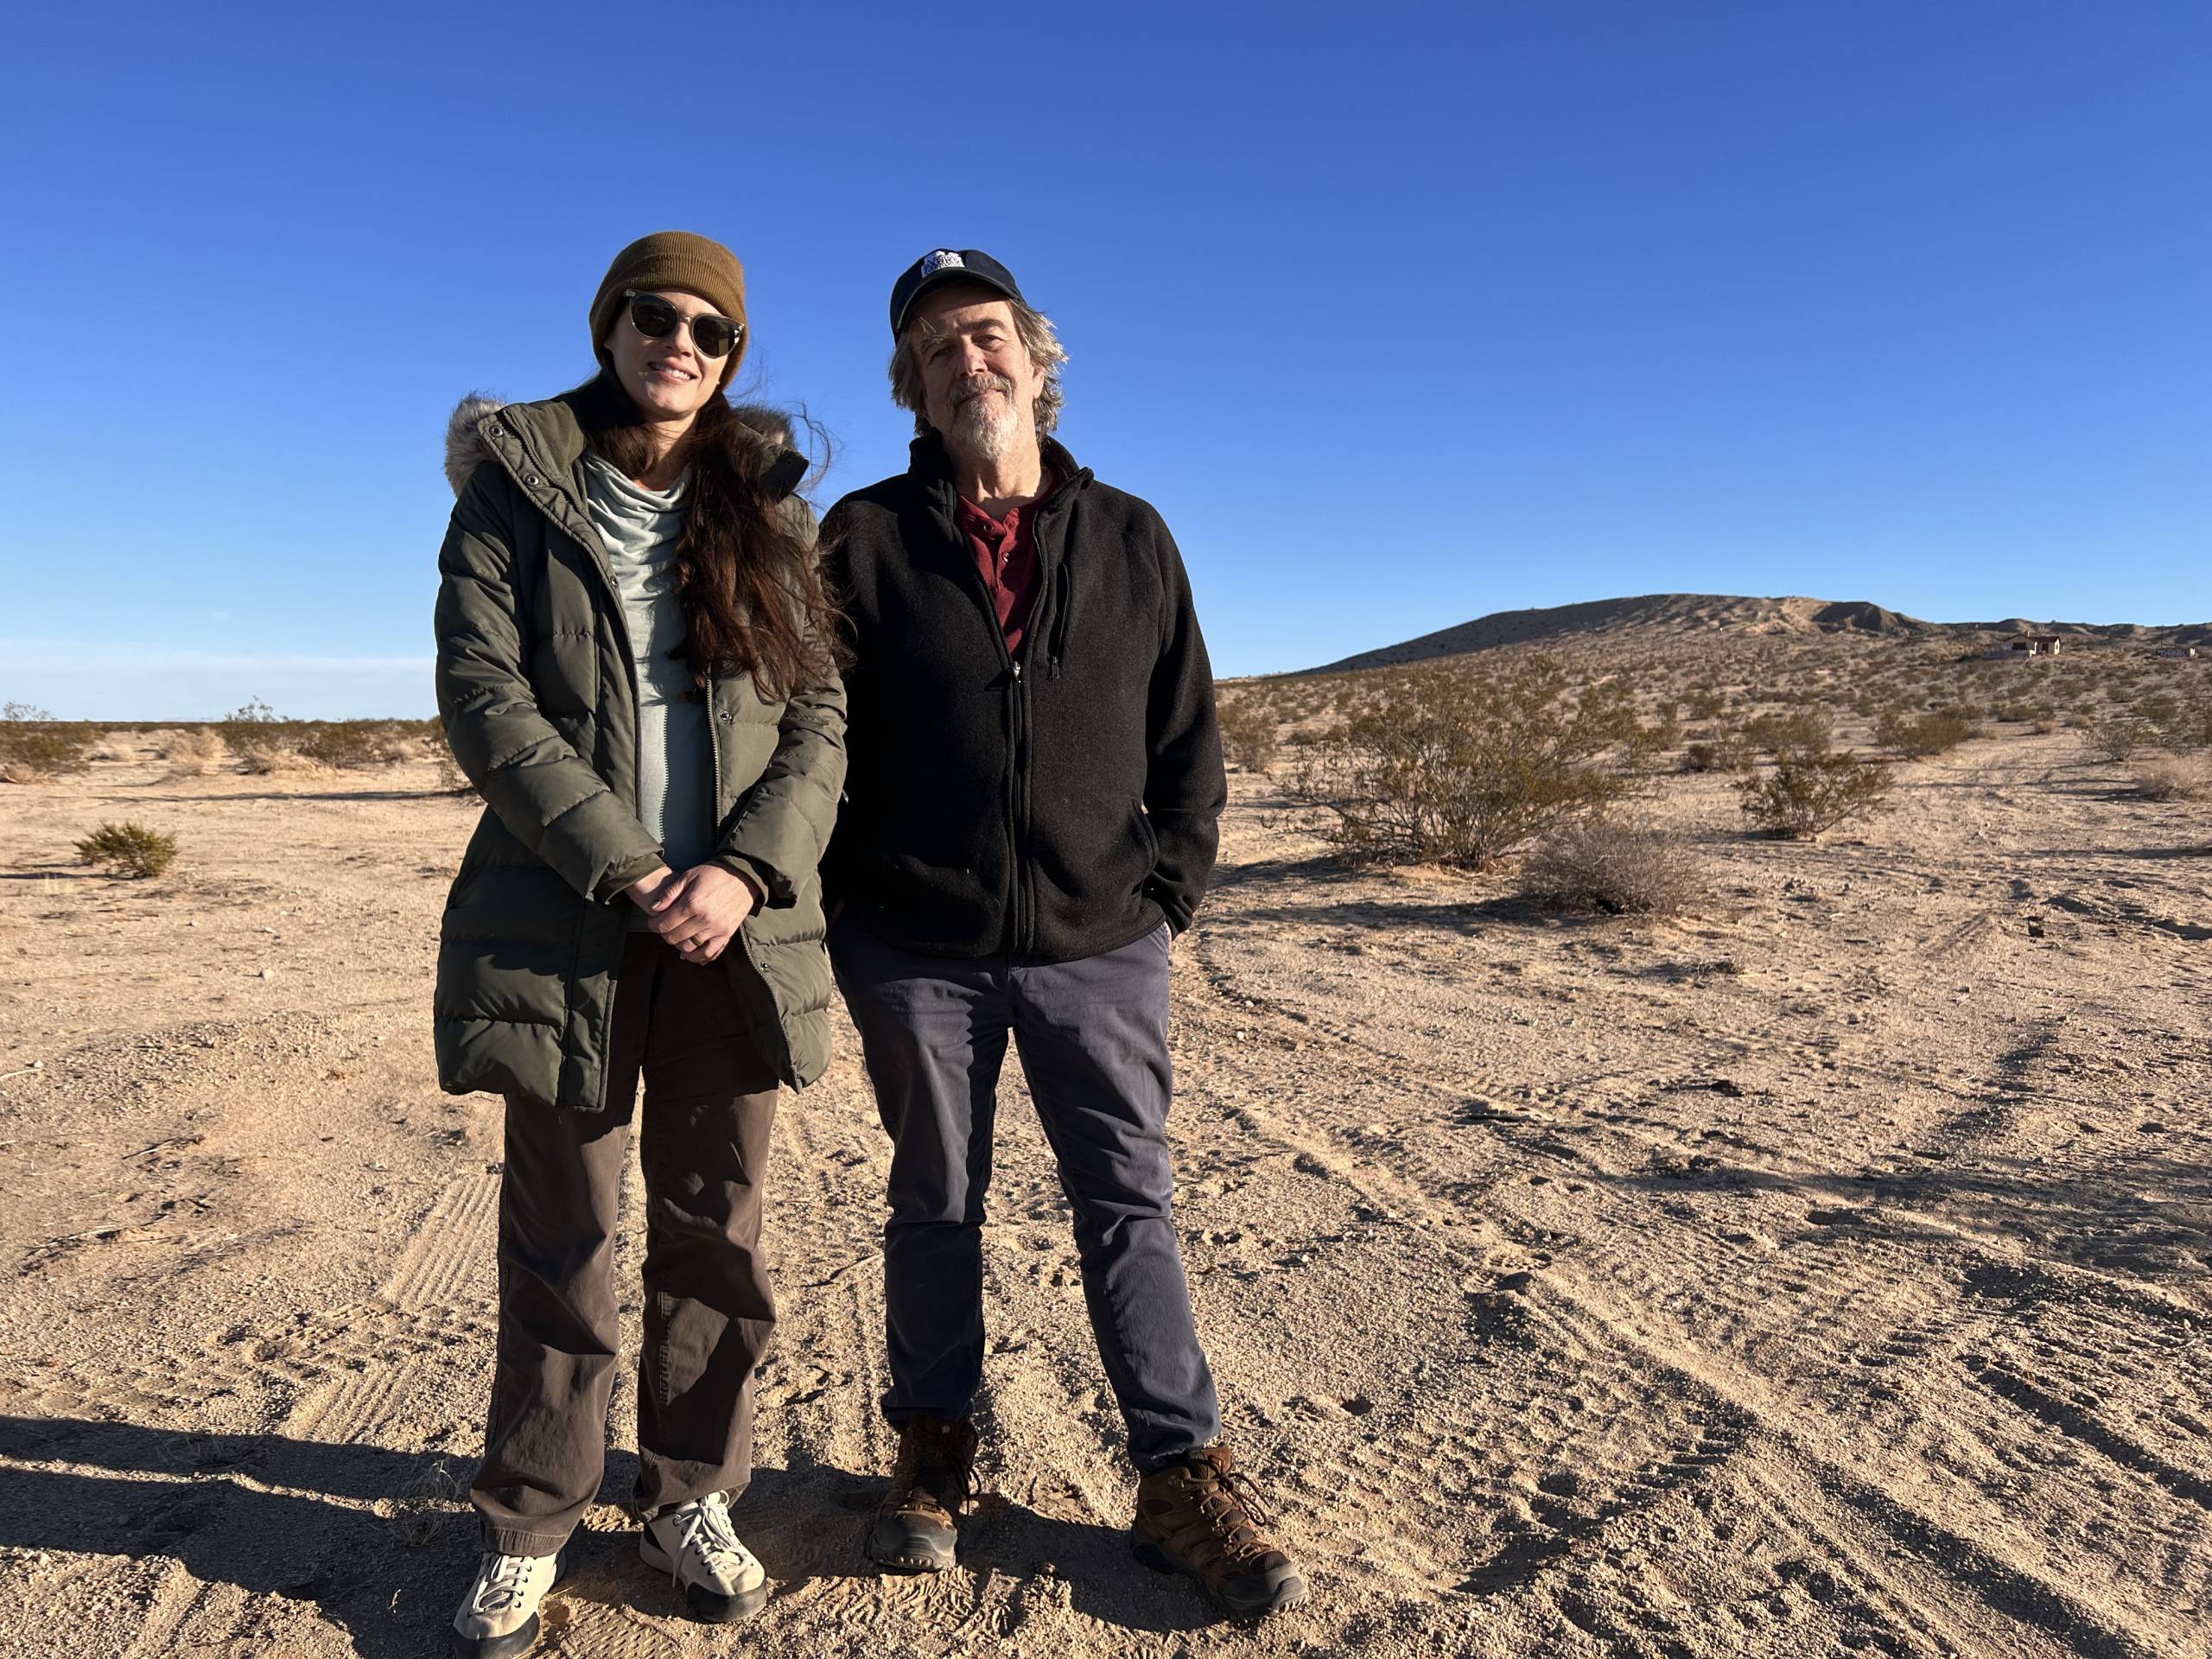 a woman and a man dressed warmly smile for a portrait in the desert against a blue sky